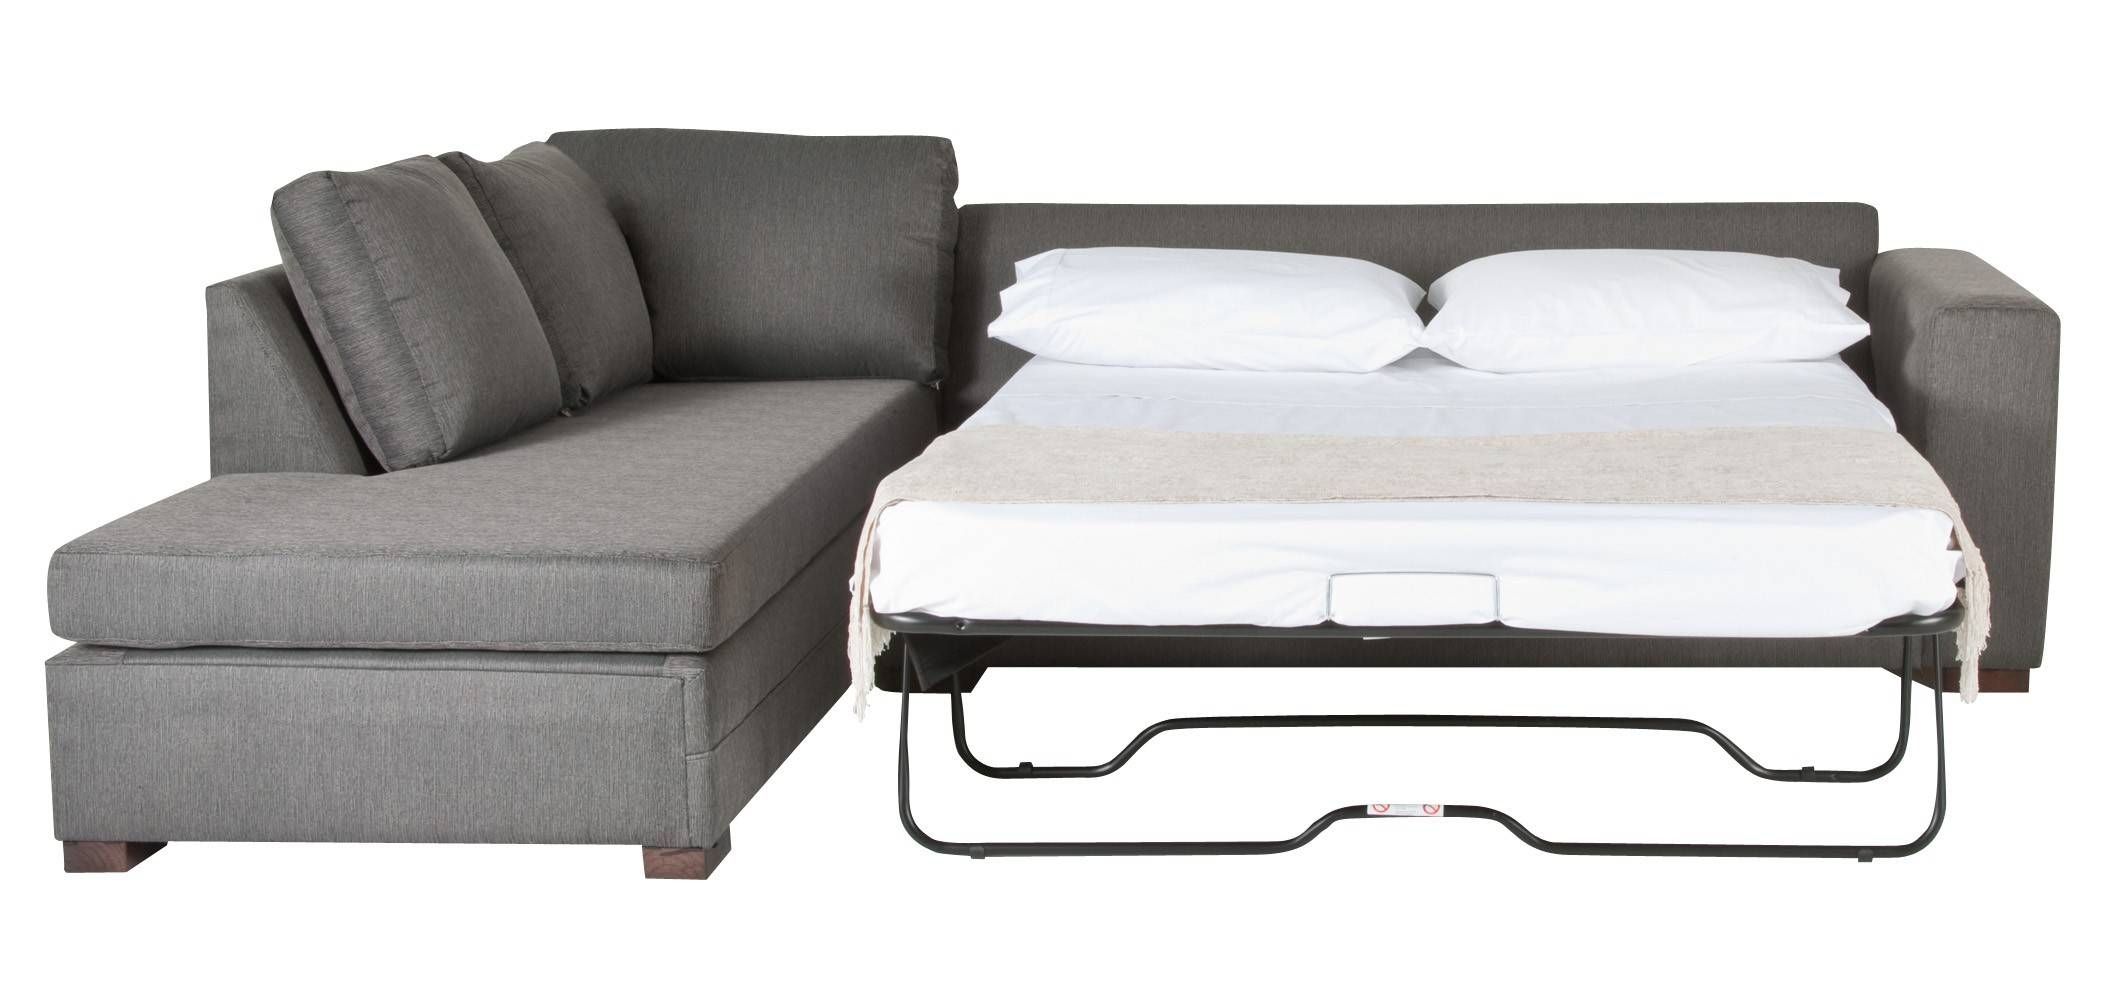 modern pullout sofa bed